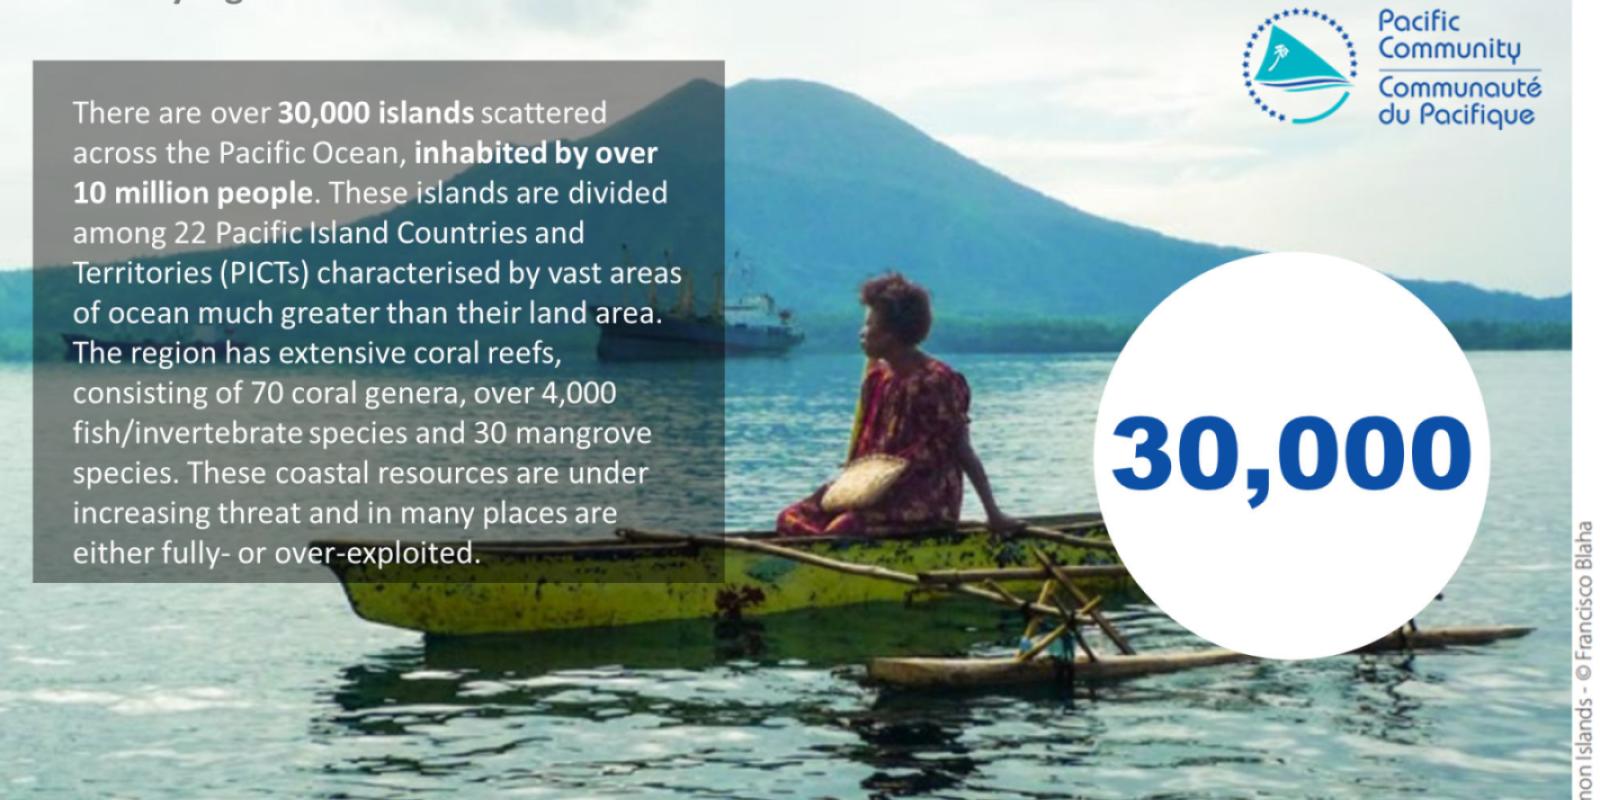 There are over 30,000 islands scattered across the Pacific Ocean, inhabited by over 10 million people. 